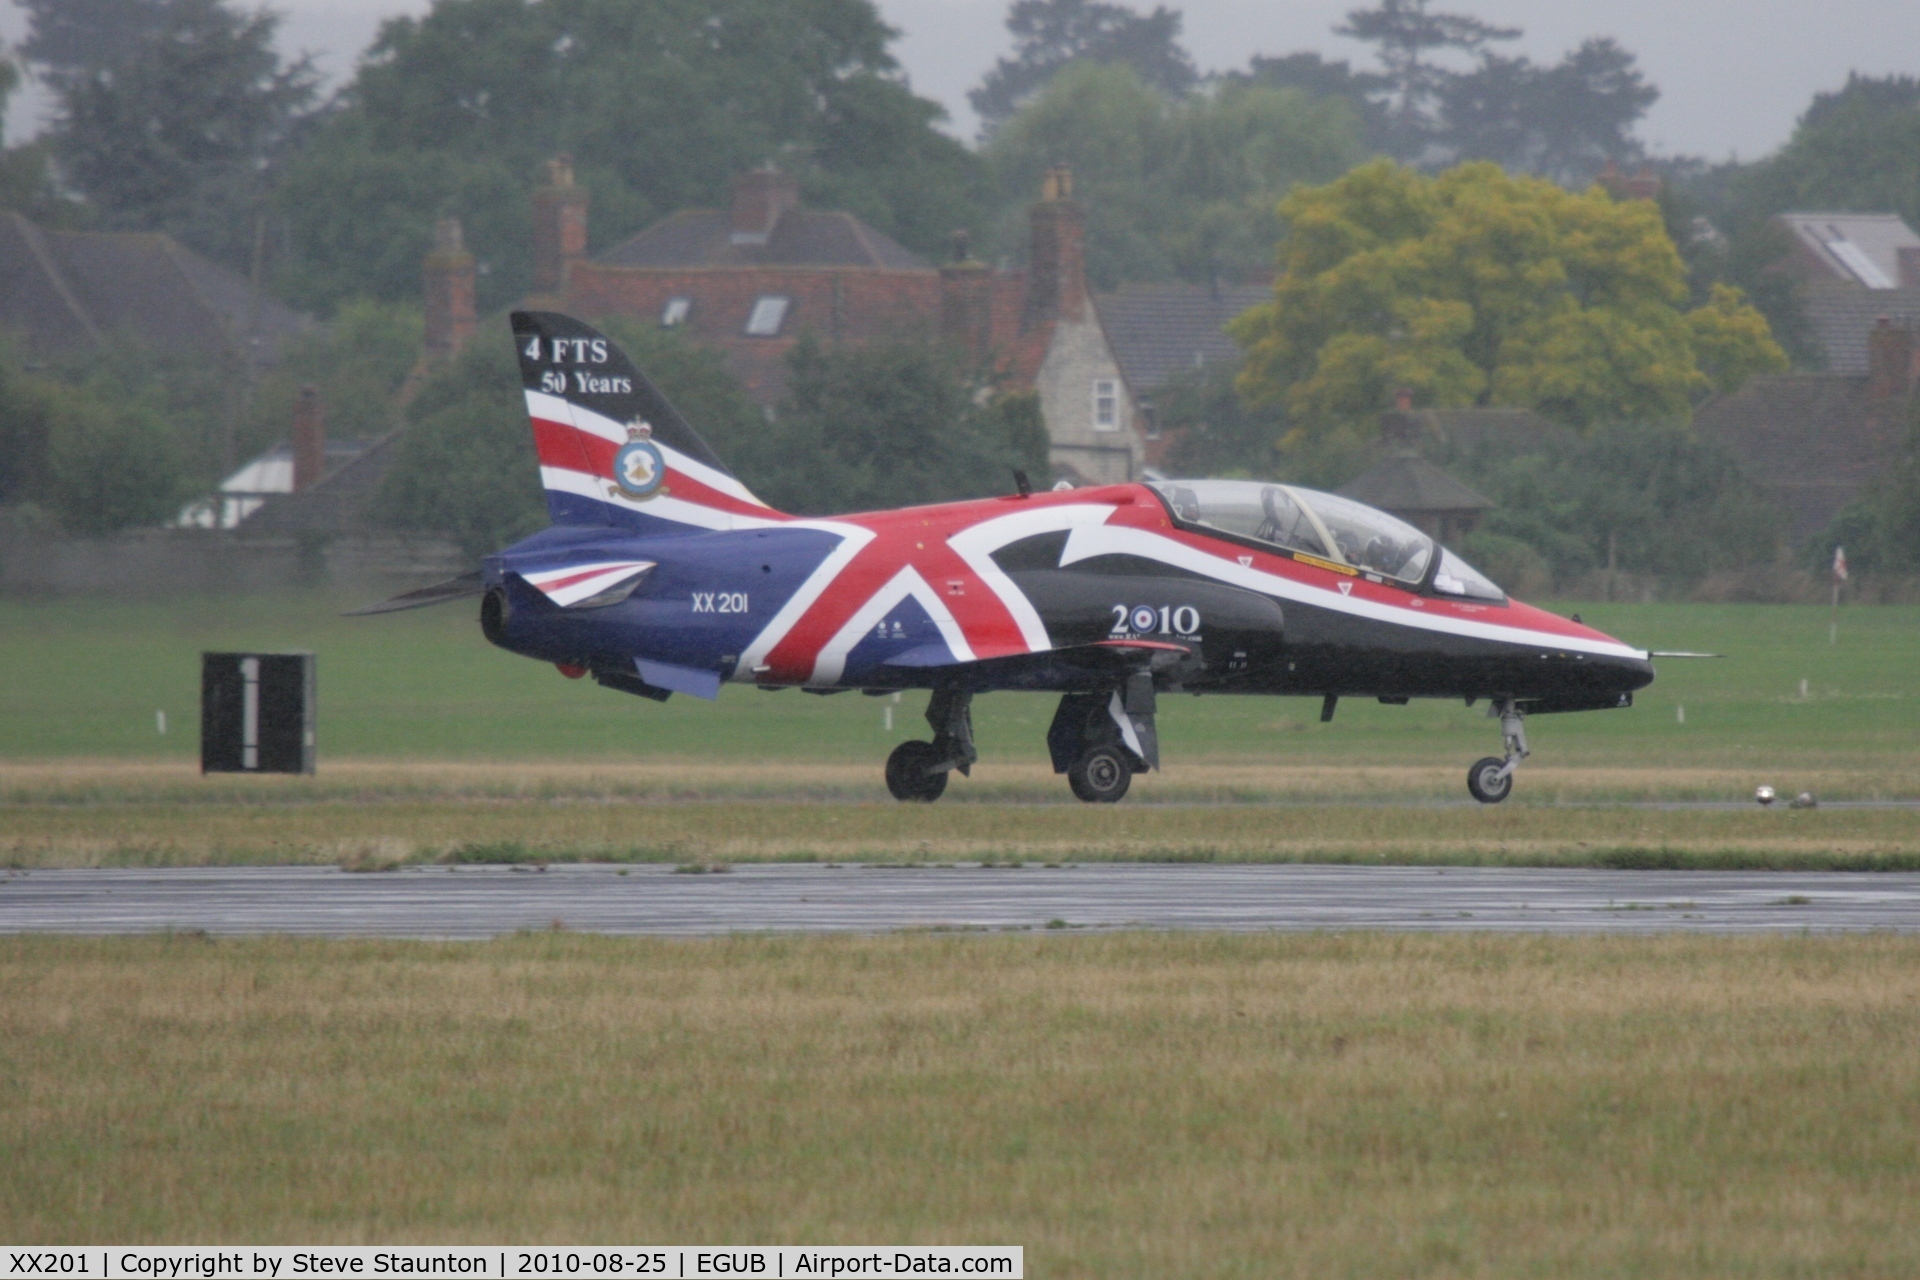 XX201, 1978 Hawker Siddeley Hawk T.1A C/N 048/312048, Taken at RAF Benson Families Day (in the pouring rain) August 2010.